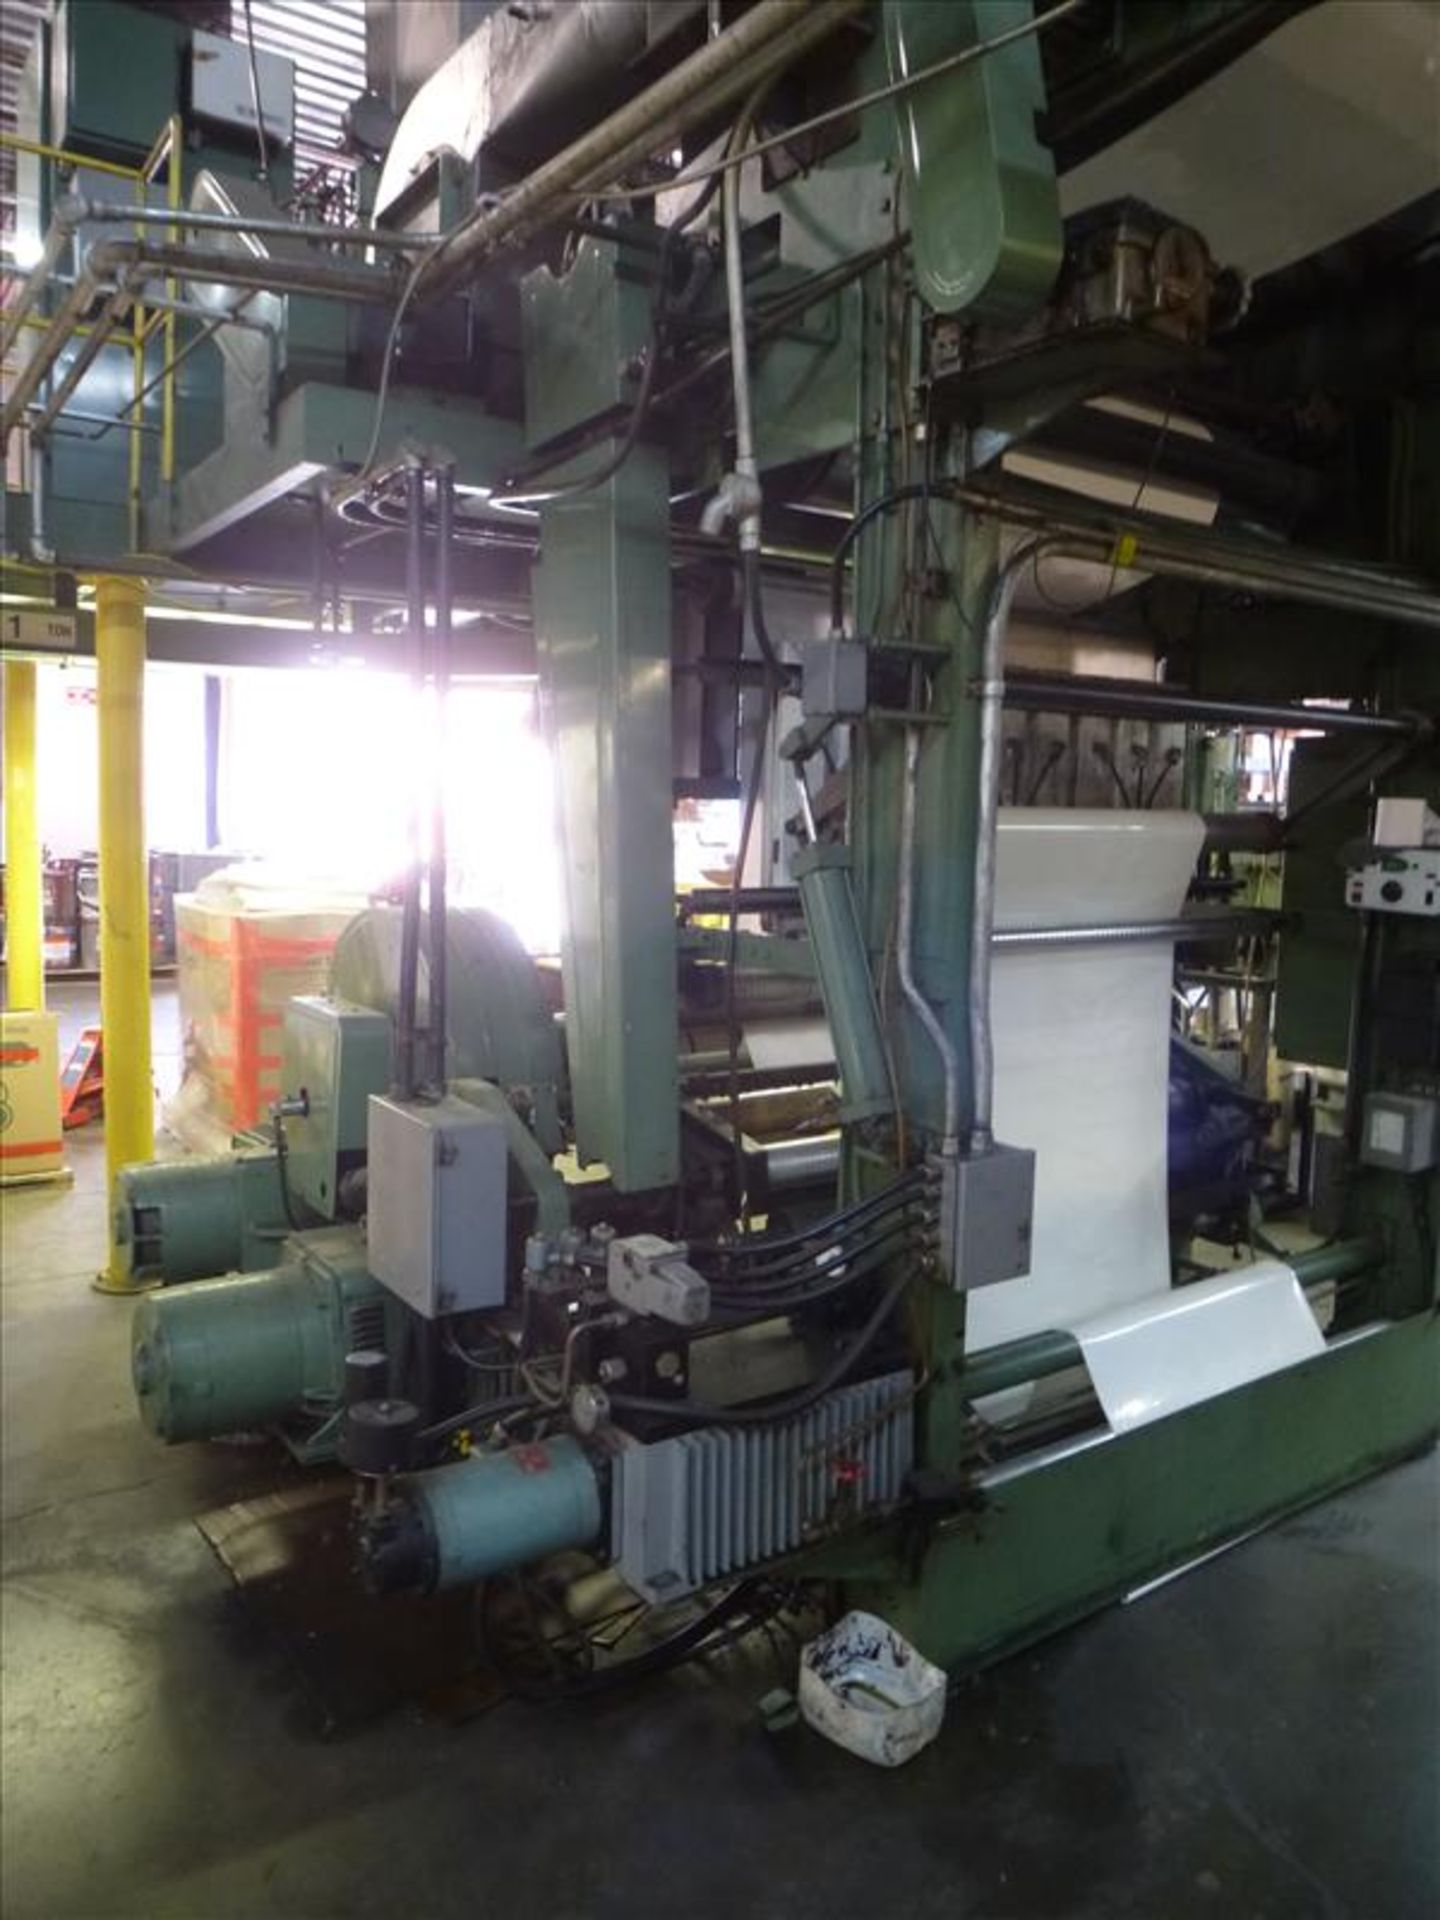 PCMC (Paper Converting Machine Co.) 6-colour central impression flexographic printing press, 56" - Image 10 of 30